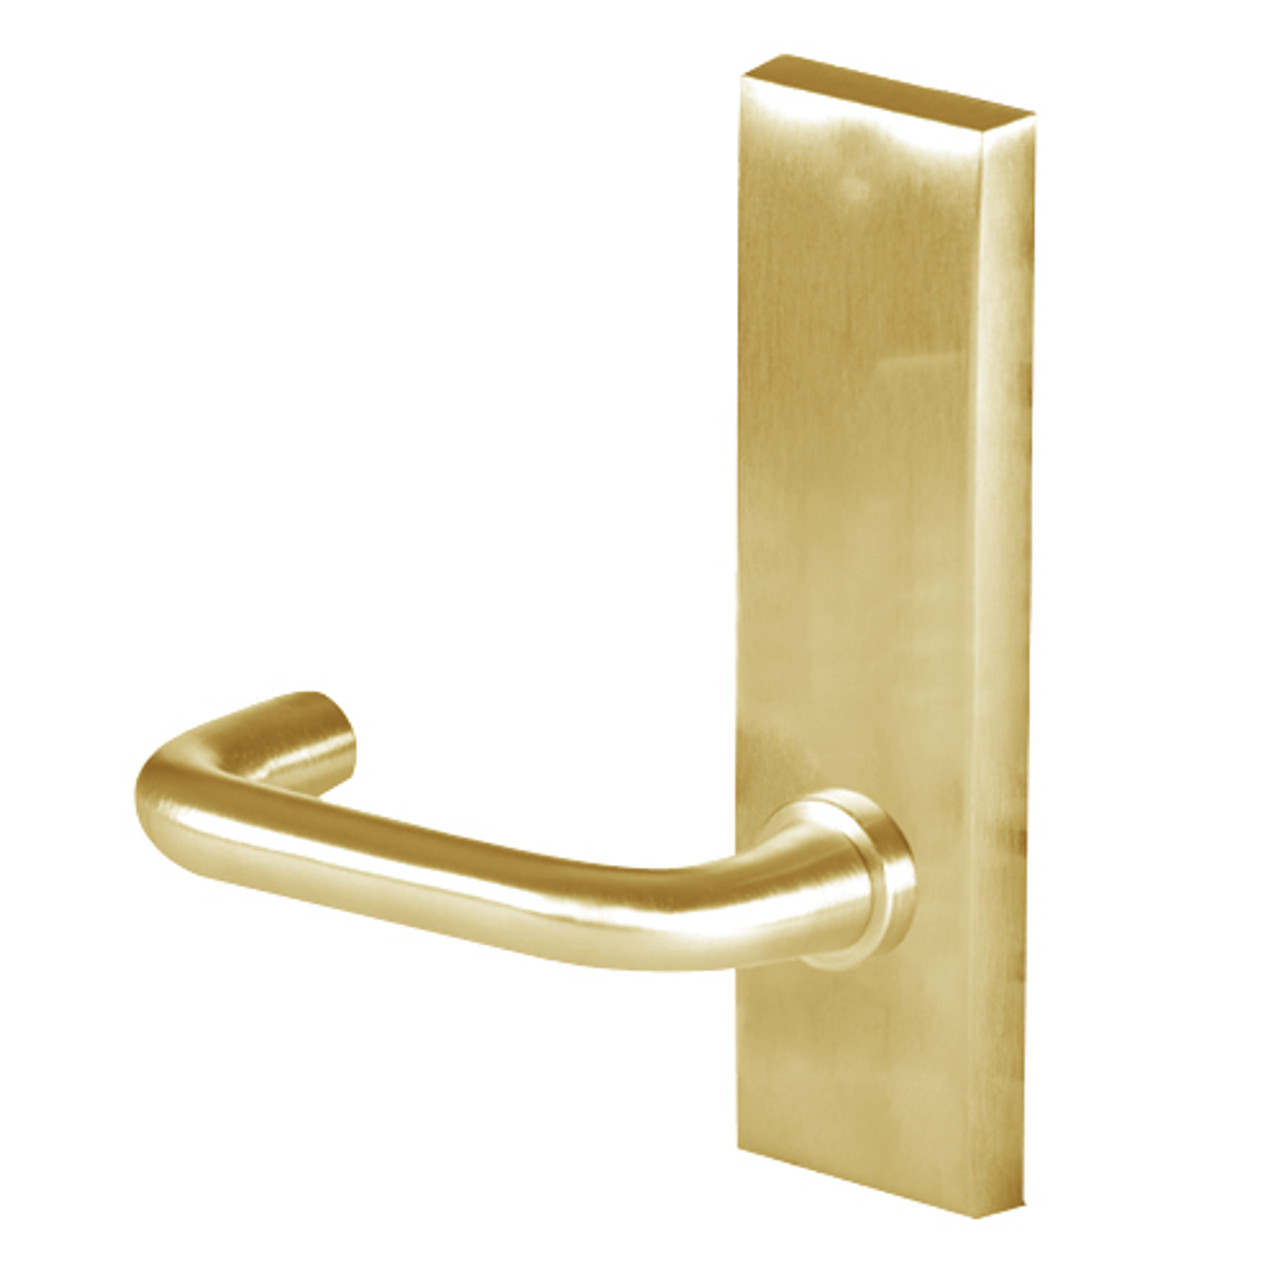 45H0LT3M606 Best 40H Series Privacy Heavy Duty Mortise Lever Lock with Solid Tube Return Style in Satin Brass